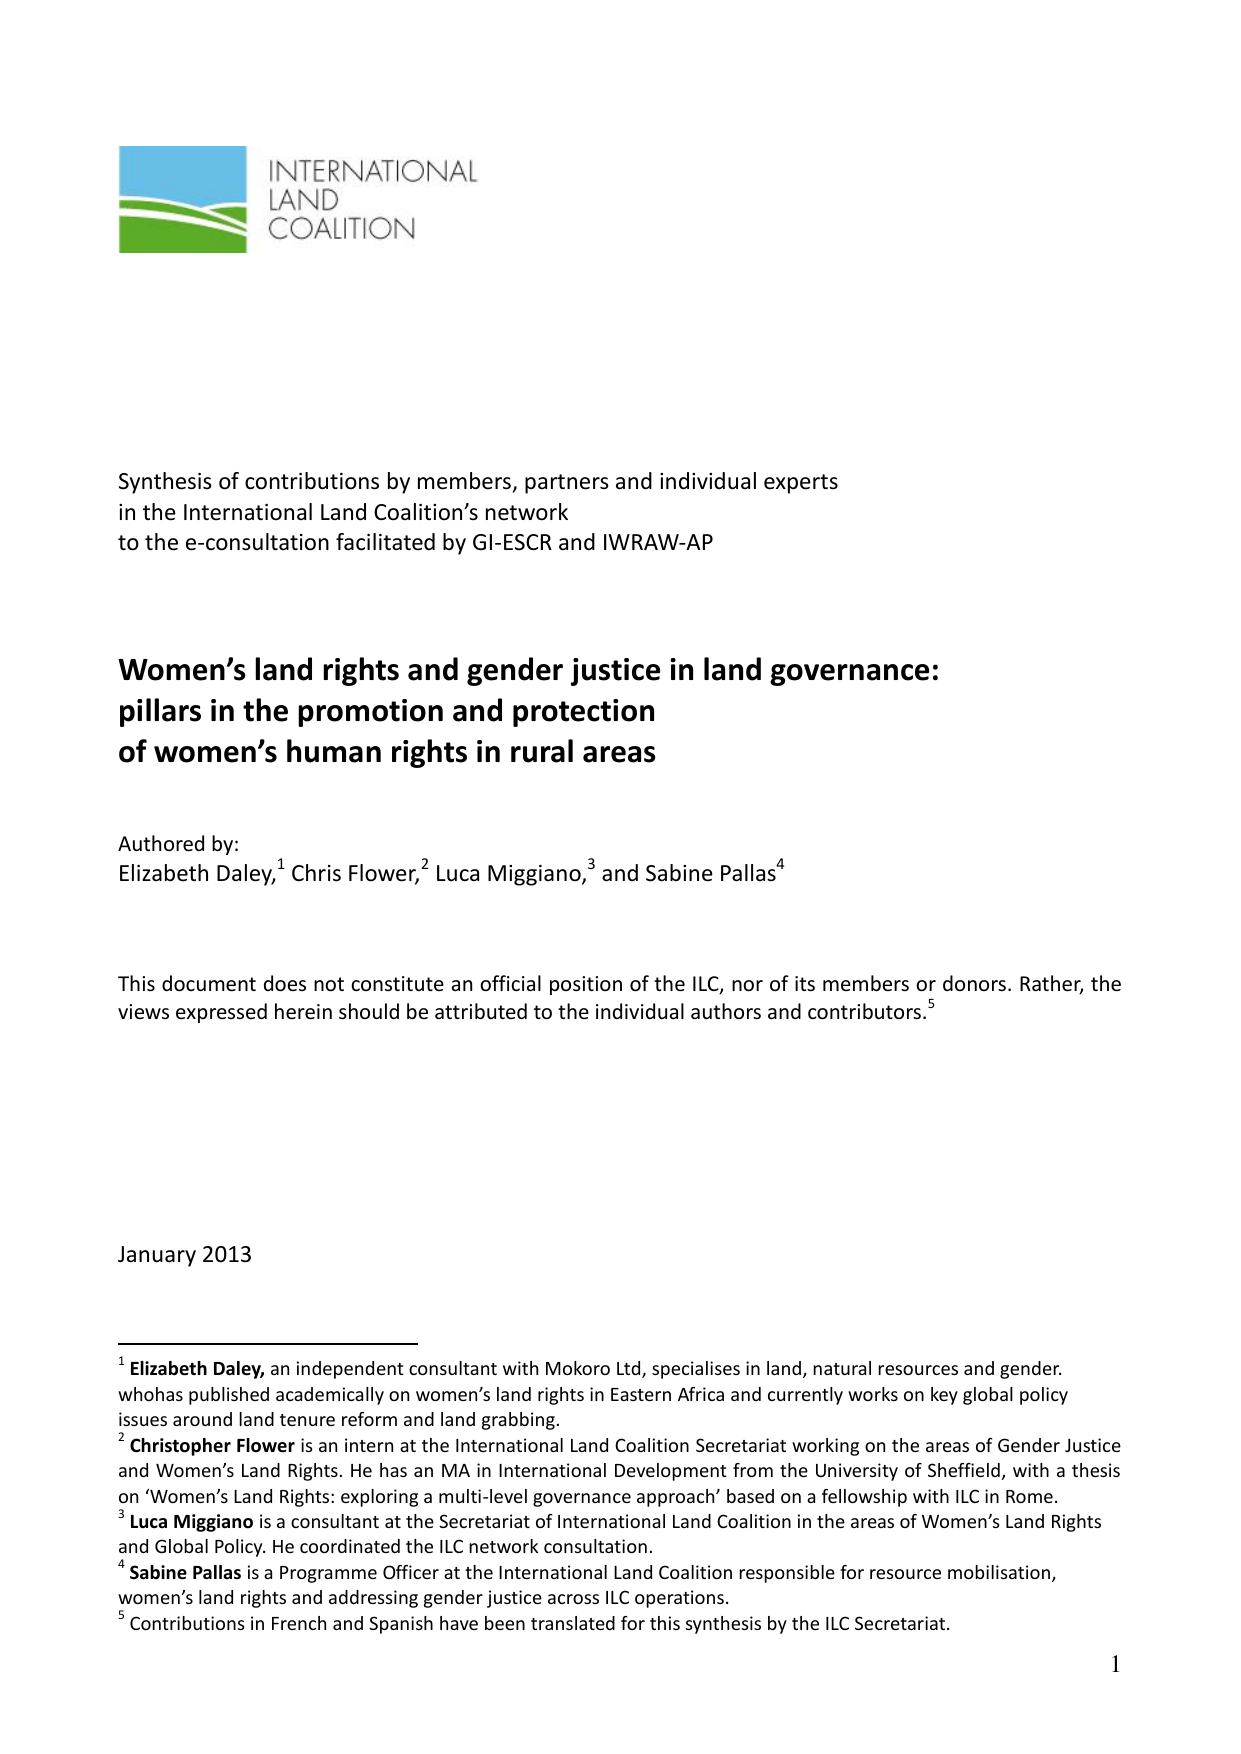 Women’s land rights and gender justice inland governance 2013